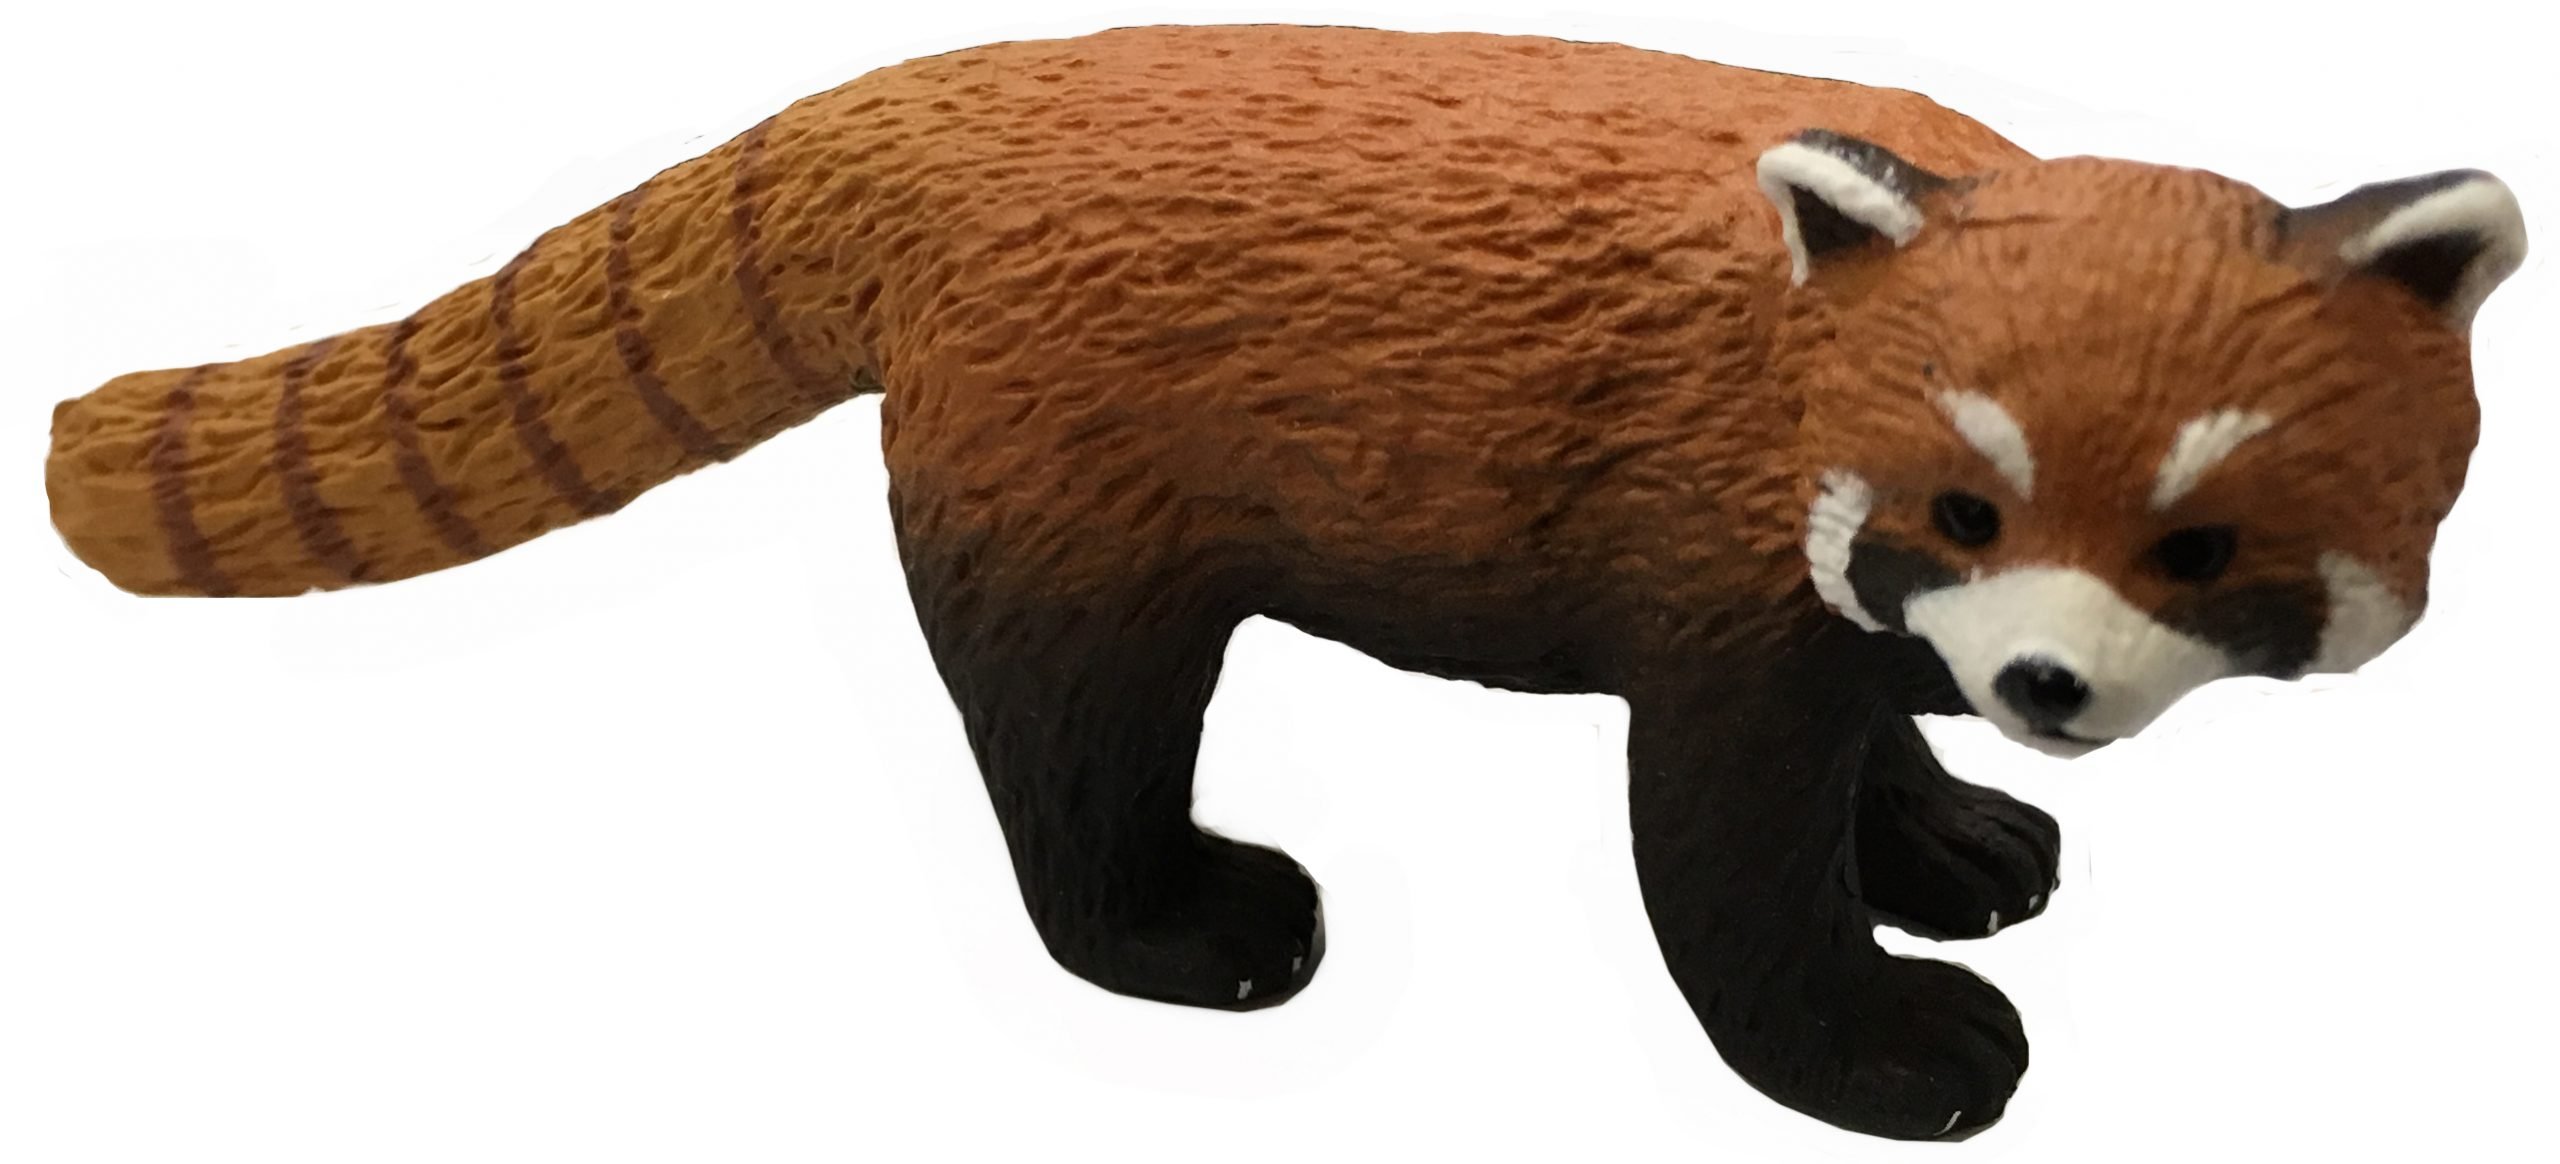 ZOO ANIMAL REPLICAS RED PANDA Small Replica Size approx 8 cm long by 3 cm high 